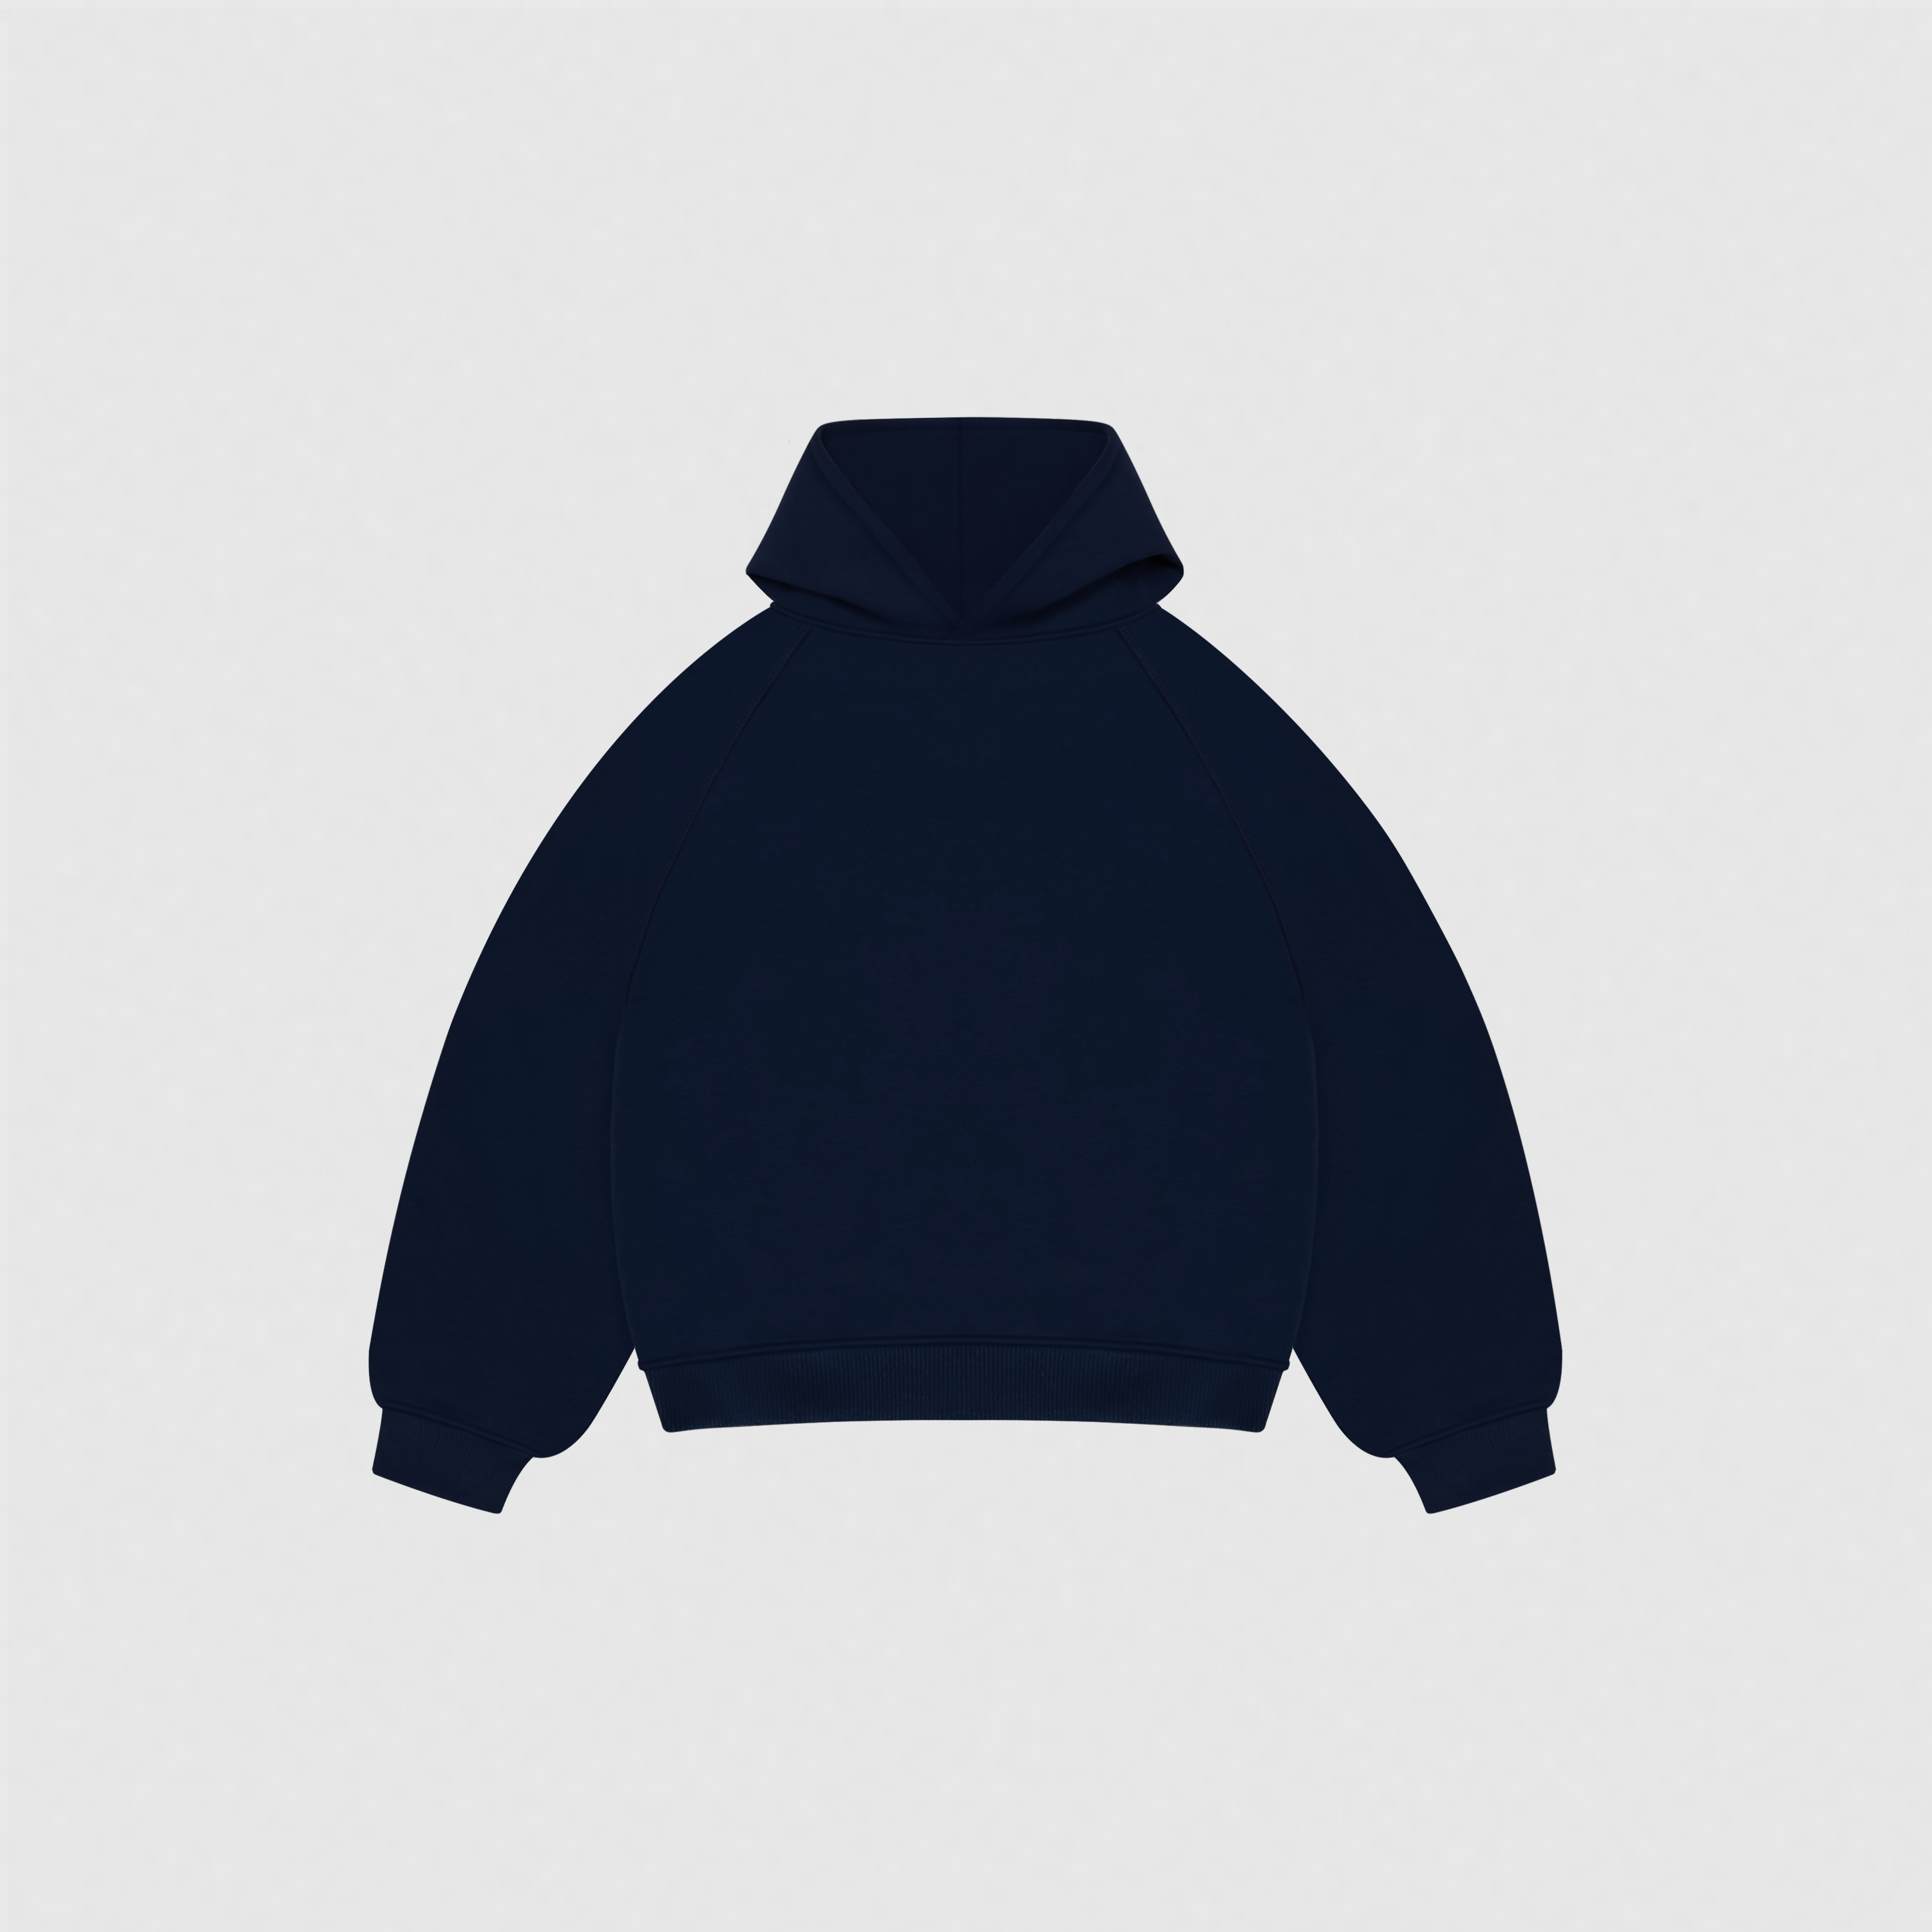 EVERYDAY NAVY BLUE HOODIE-Hoodie-Lomalab-2X-SMALL-Blue navy-Lomalab